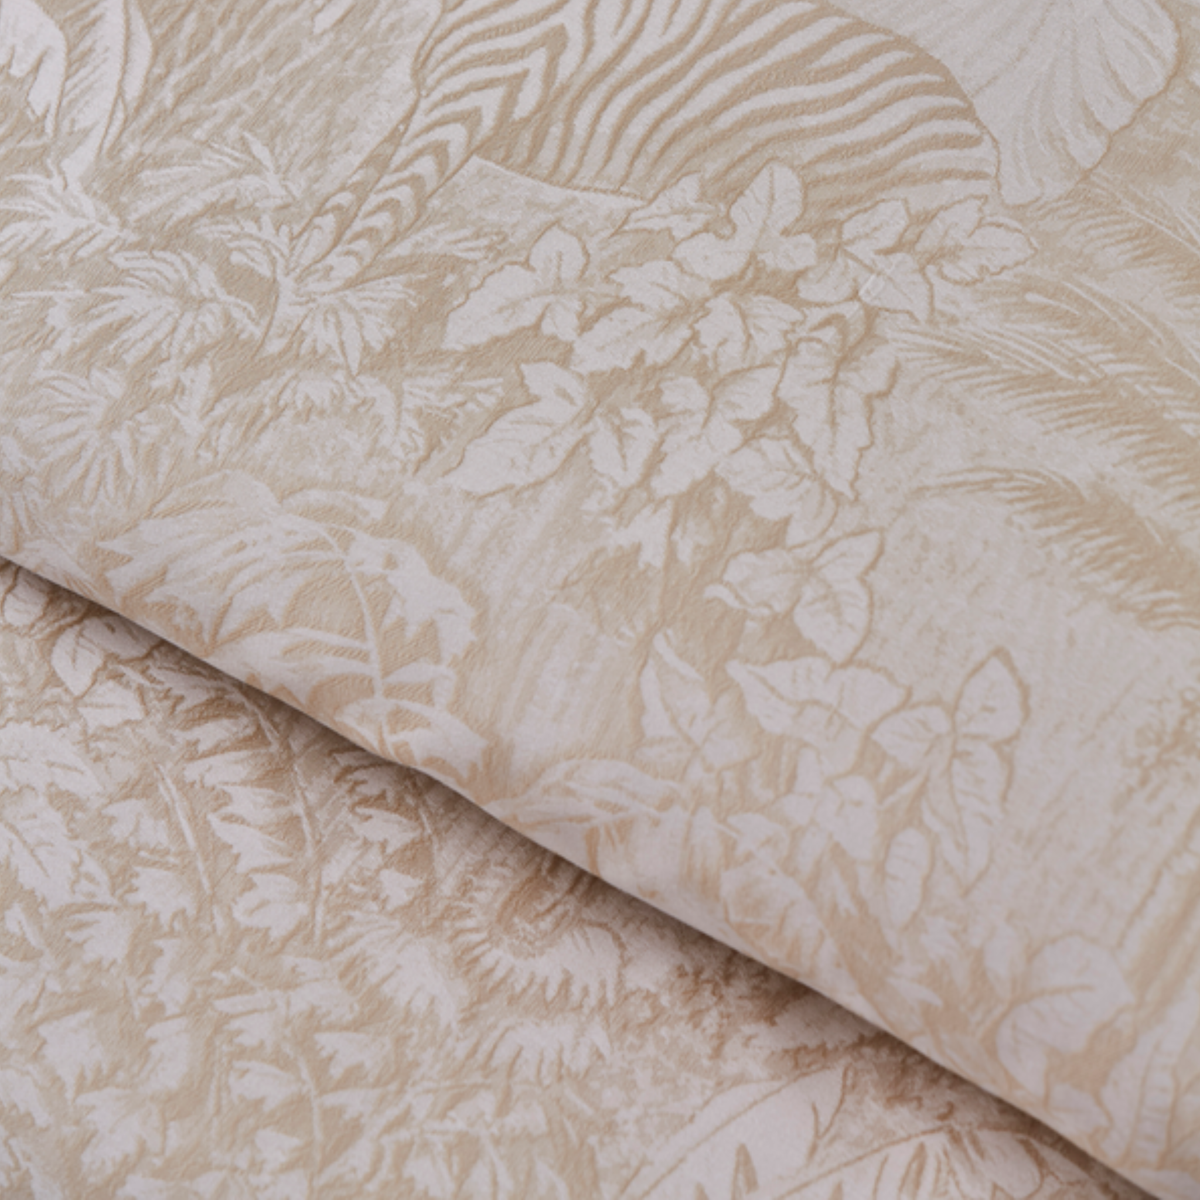 Fabric Detail of Yves Delorme Faune Bedding